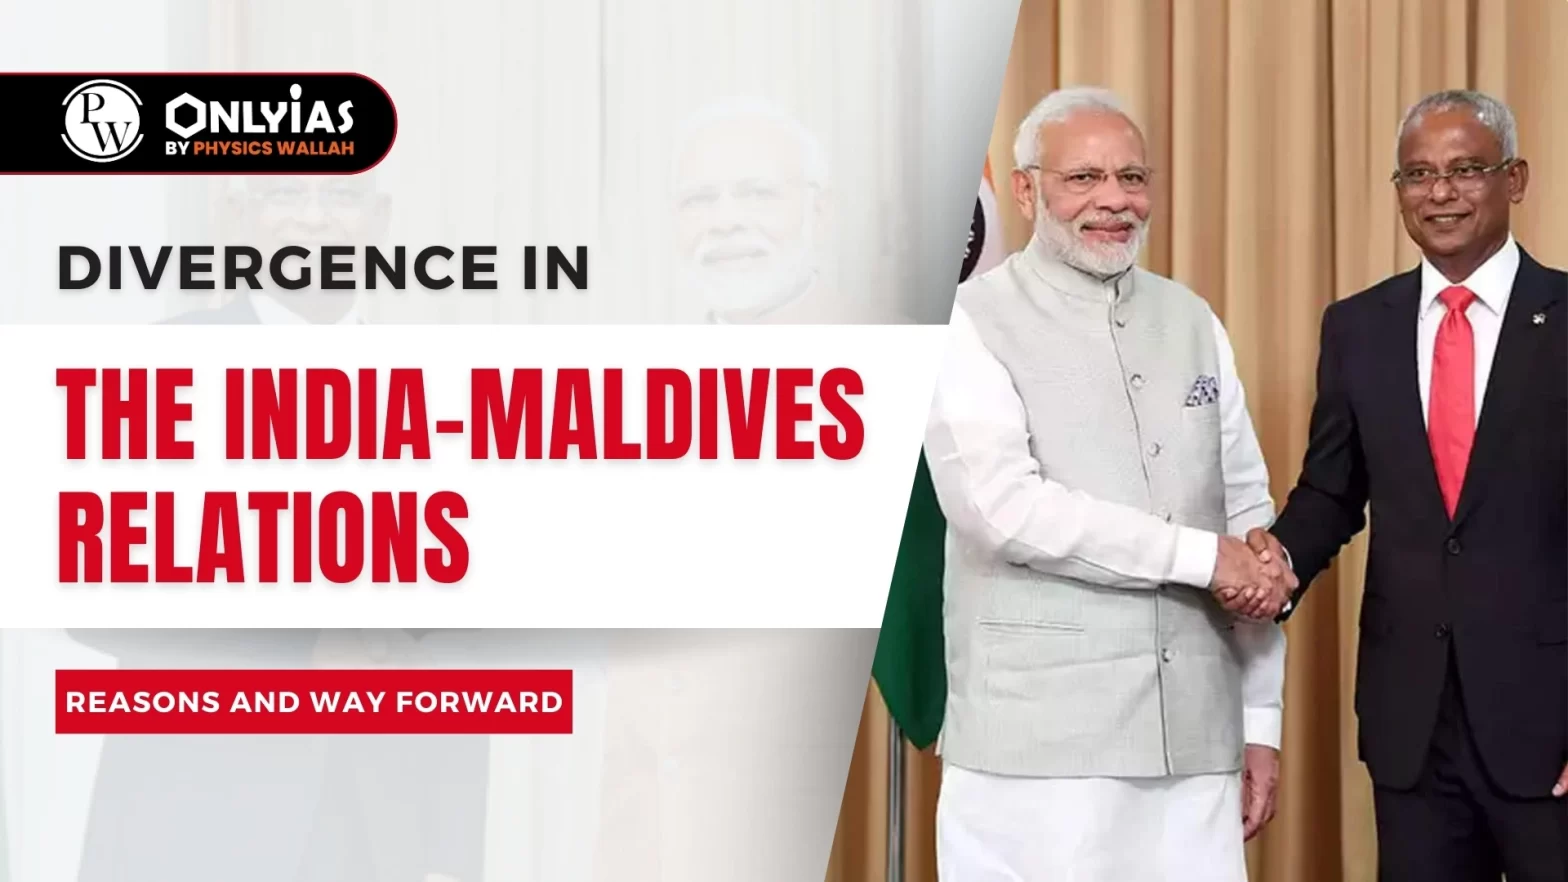 Divergence in the India-Maldives Relations: Reasons and Way Forward